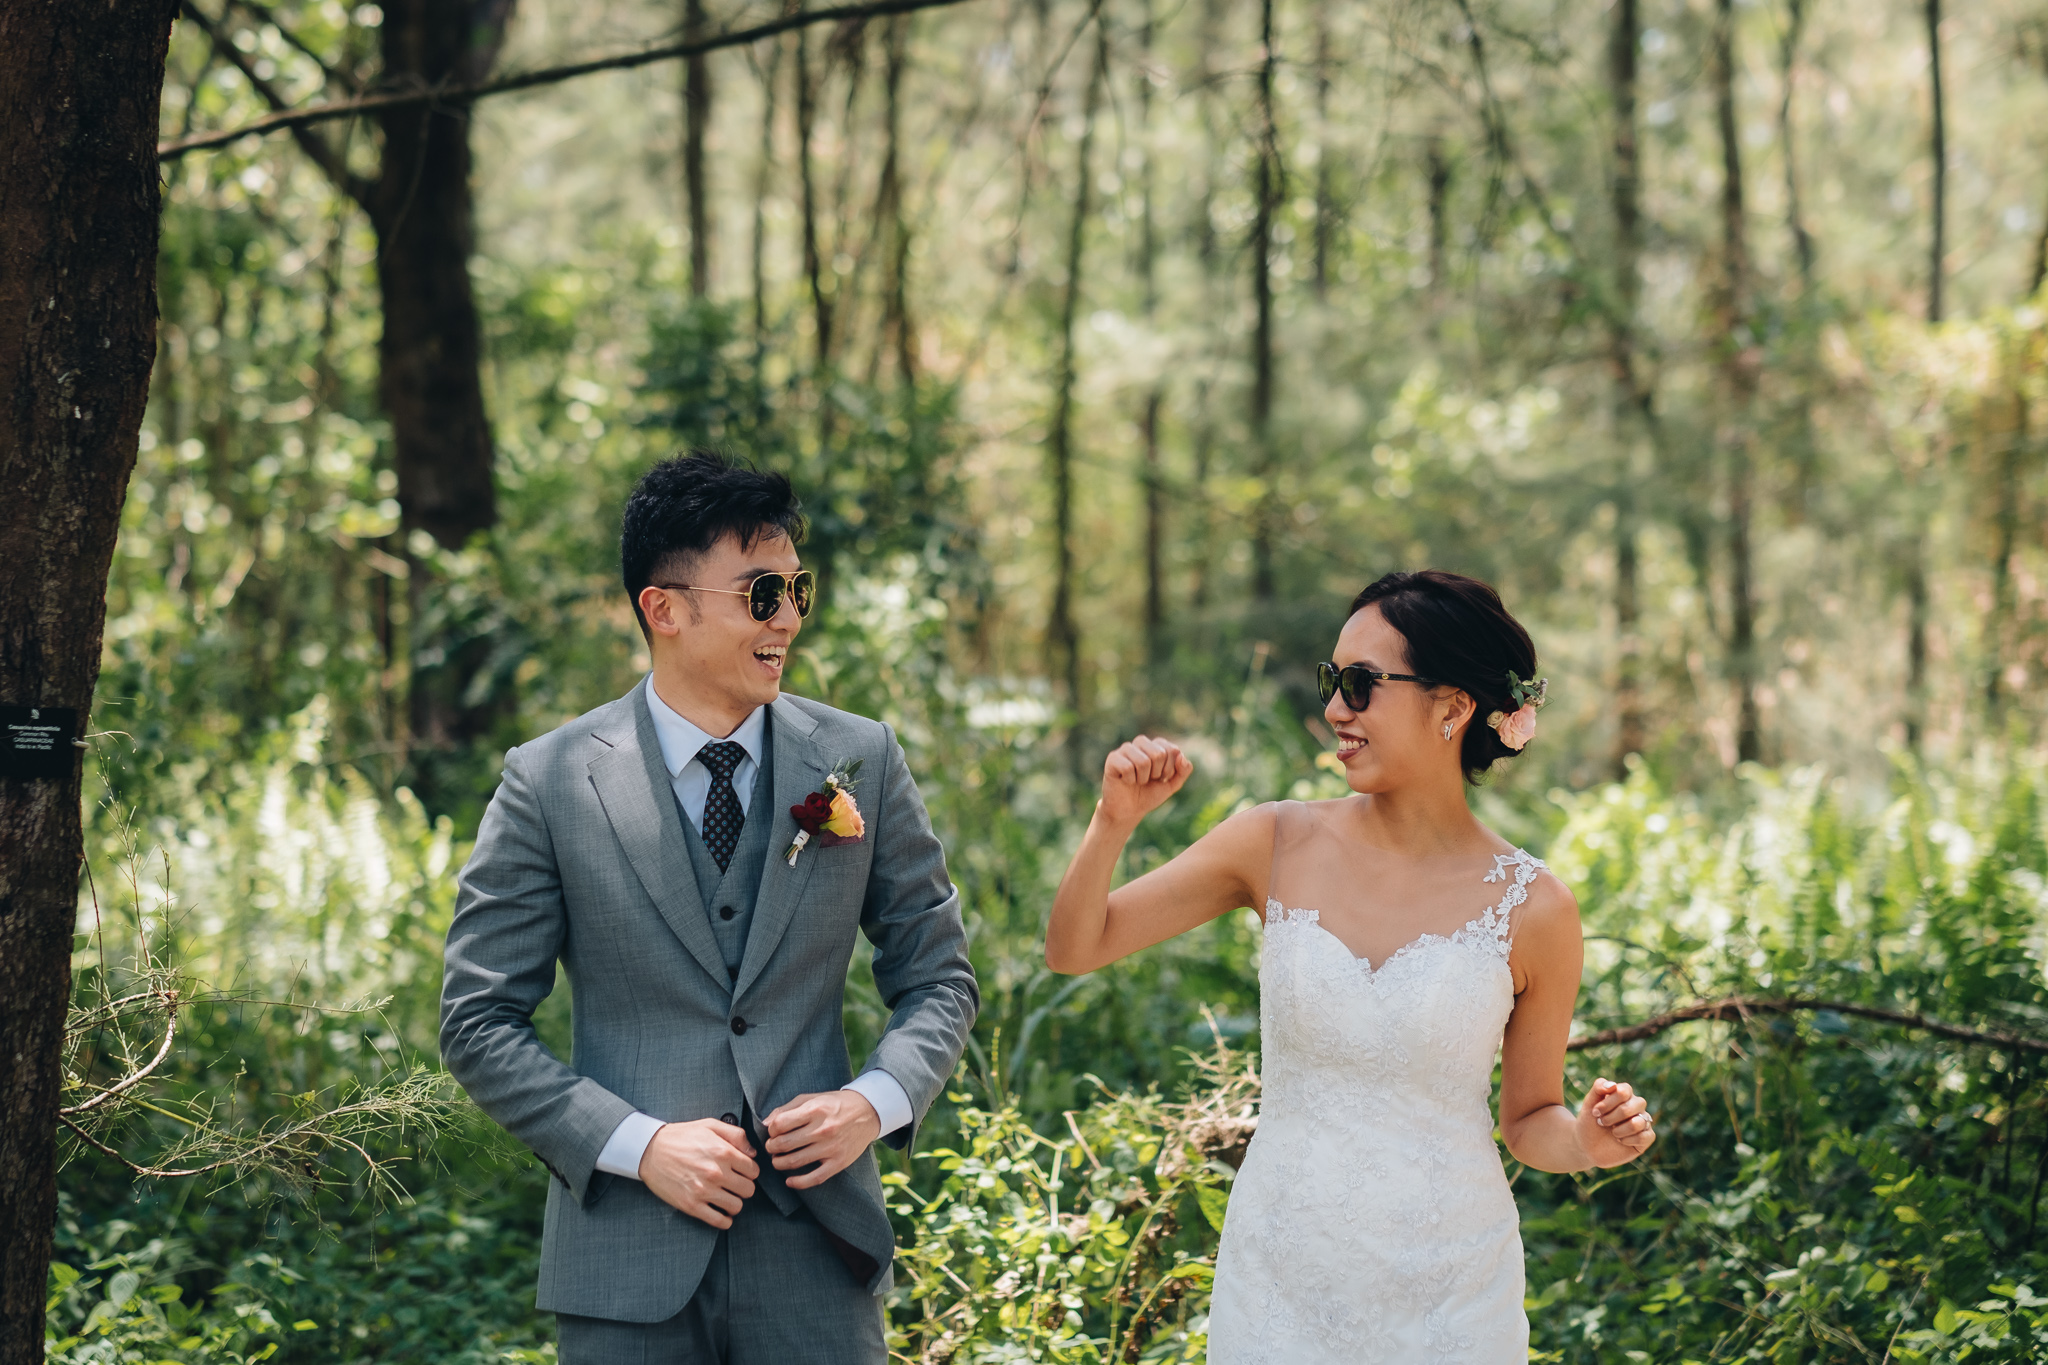 Kenneth & Lixin Pre-Wed (resized for sharing) - 132.jpg